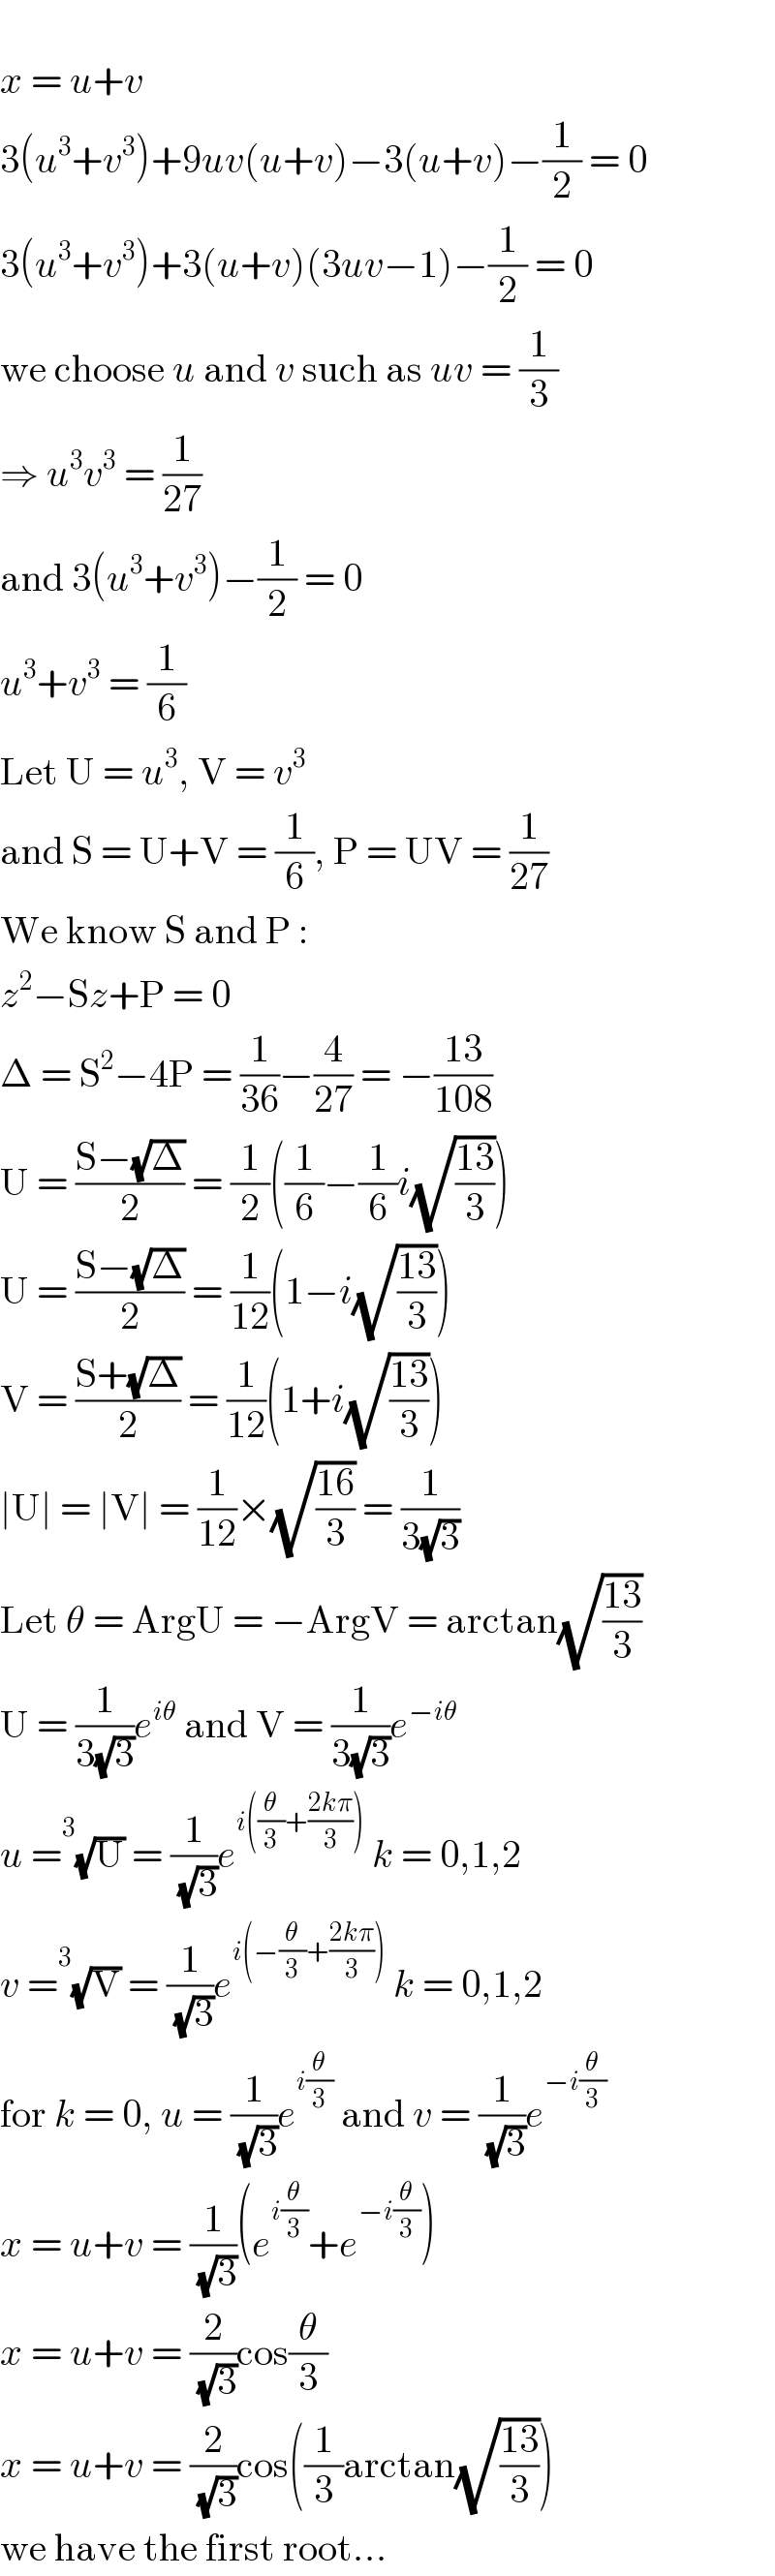   x = u+v  3(u^3 +v^3 )+9uv(u+v)−3(u+v)−(1/2) = 0  3(u^3 +v^3 )+3(u+v)(3uv−1)−(1/2) = 0  we choose u and v such as uv = (1/3)  ⇒ u^3 v^3  = (1/(27))  and 3(u^3 +v^3 )−(1/2) = 0  u^3 +v^3  = (1/6)  Let U = u^3 , V = v^3   and S = U+V = (1/6), P = UV = (1/(27))  We know S and P :  z^2 −Sz+P = 0  Δ = S^2 −4P = (1/(36))−(4/(27)) = −((13)/(108))  U = ((S−(√Δ))/2) = (1/2)((1/6)−(1/6)i(√((13)/3)))  U = ((S−(√Δ))/2) = (1/(12))(1−i(√((13)/3)))  V = ((S+(√Δ))/2) = (1/(12))(1+i(√((13)/3)))  ∣U∣ = ∣V∣ = (1/(12))×(√((16)/3)) = (1/(3(√3)))  Let θ = ArgU = −ArgV = arctan(√((13)/3))  U = (1/(3(√3)))e^(iθ)  and V = (1/(3(√3)))e^(−iθ)   u = ^3 (√U) = (1/( (√3)))e^(i((θ/3)+((2kπ)/3)))  k = 0,1,2  v = ^3 (√V) = (1/( (√3)))e^(i(−(θ/3)+((2kπ)/3)))  k = 0,1,2  for k = 0, u = (1/( (√3)))e^(i(θ/3))  and v = (1/( (√3)))e^(−i(θ/3))   x = u+v = (1/( (√3)))(e^(i(θ/3)) +e^(−i(θ/3)) )  x = u+v = (2/( (√3)))cos(θ/3)  x = u+v = (2/( (√3)))cos((1/3)arctan(√((13)/3)))  we have the first root...  